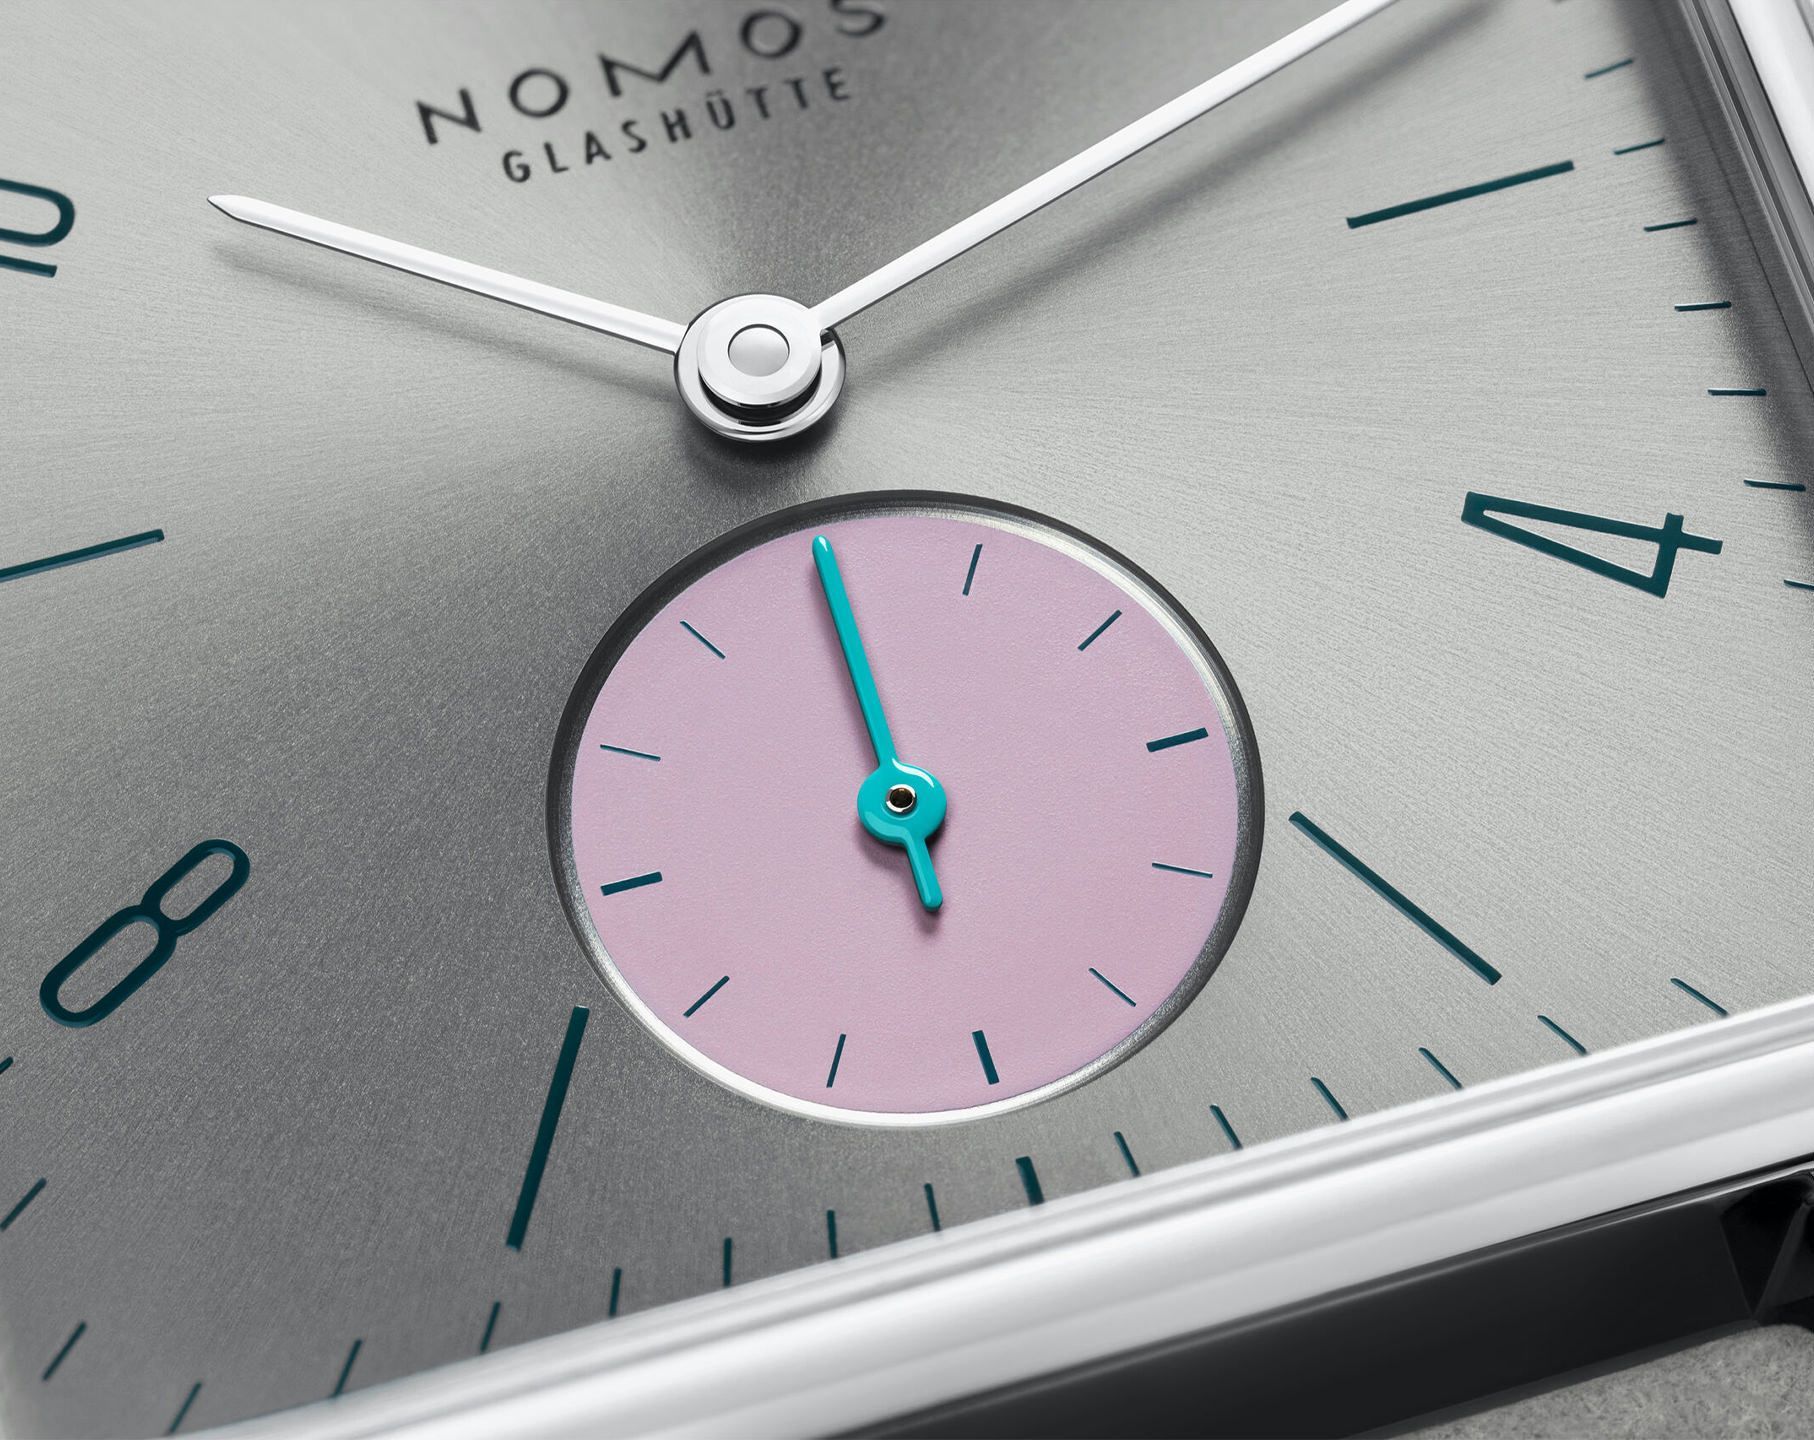 Nomos Glashutte Tetra  Silver Dial 29.5 mm Manual Winding Watch For Unisex - 5